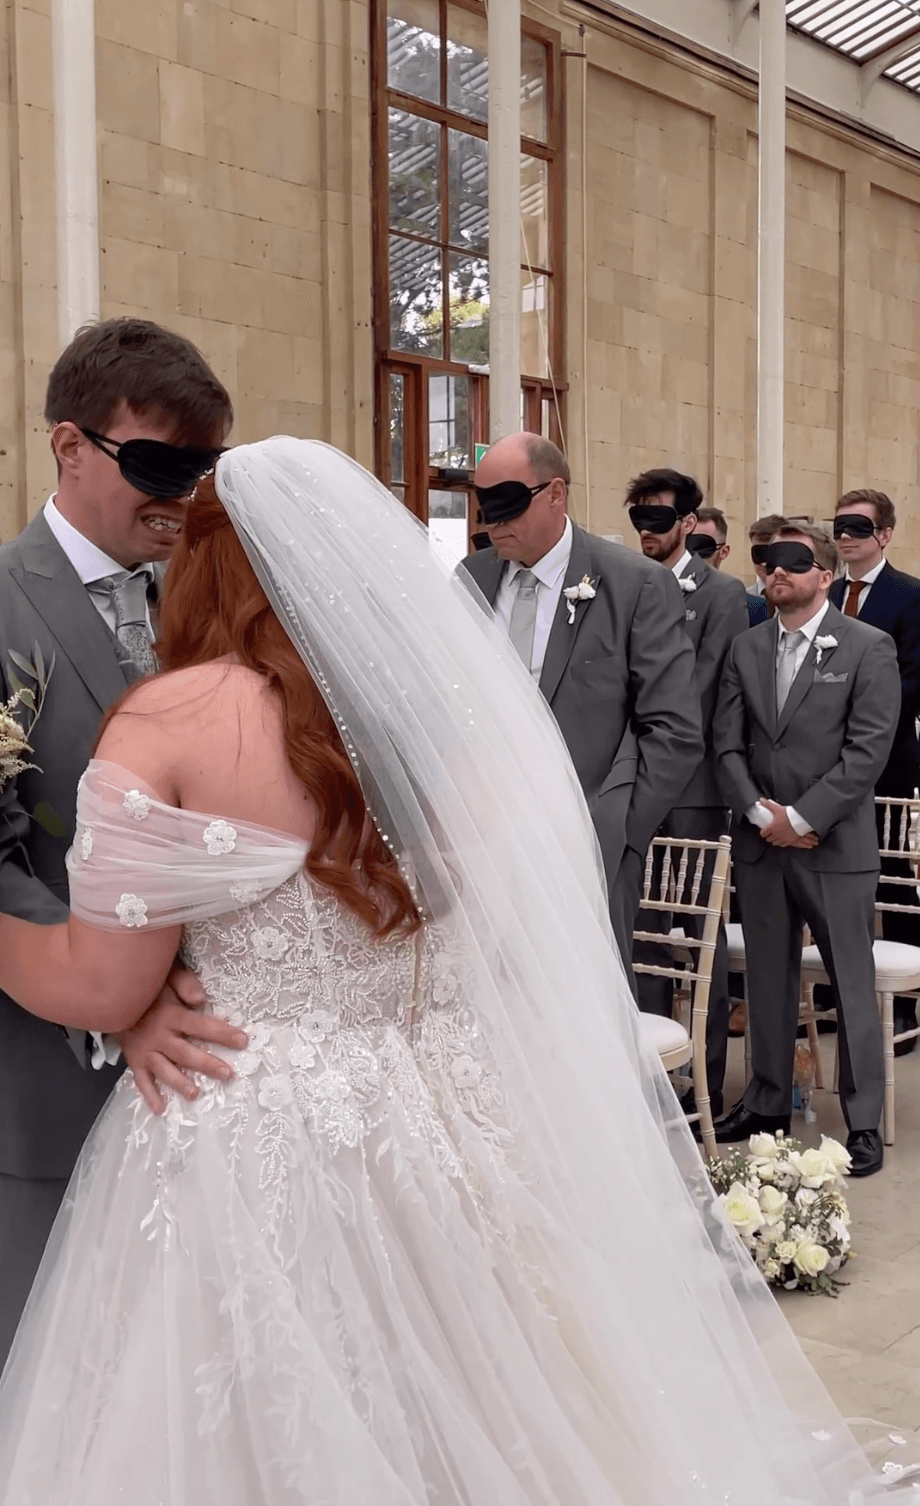 On "seeing" his bride's wedding dress, a blindfolded Mr. Cave was overwhelmed with emotion and fell to his knees. (Courtesy of <a href="https://www.instagram.com/theweddingguy__/">Adam Stewart</a>)